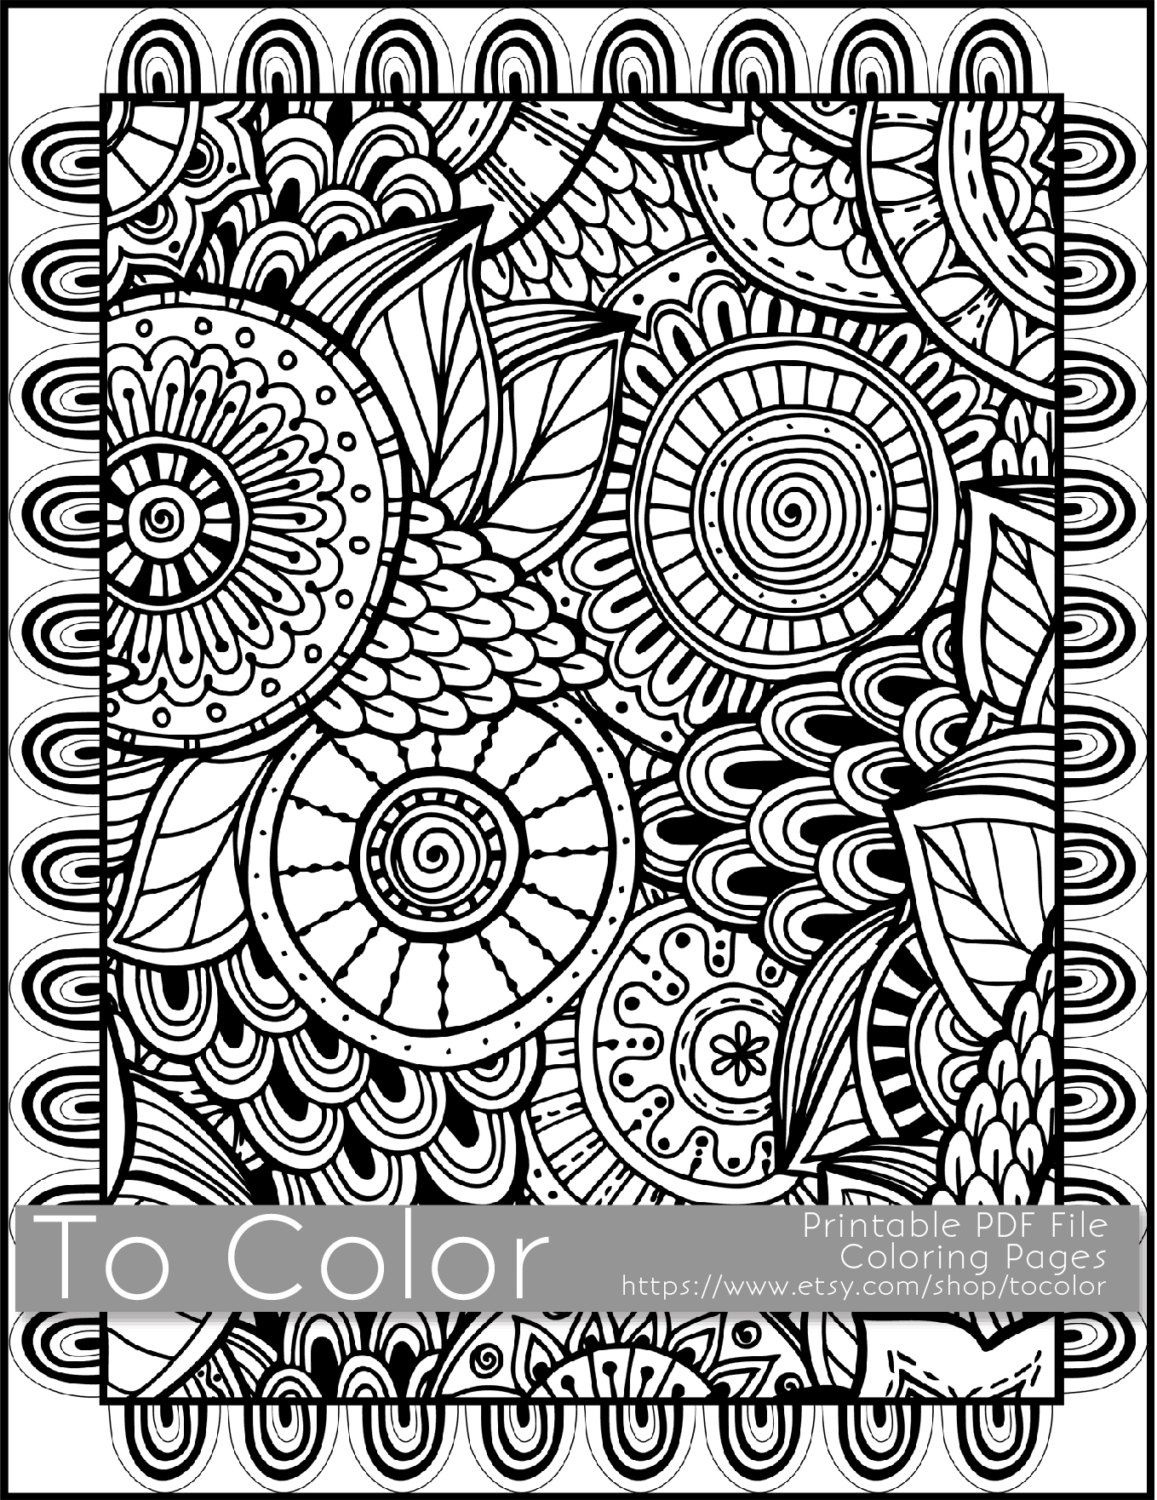 Pinkate Pullen On Free Coloring Pages For Coloring Fans | Adult - Free Printable Doodle Patterns